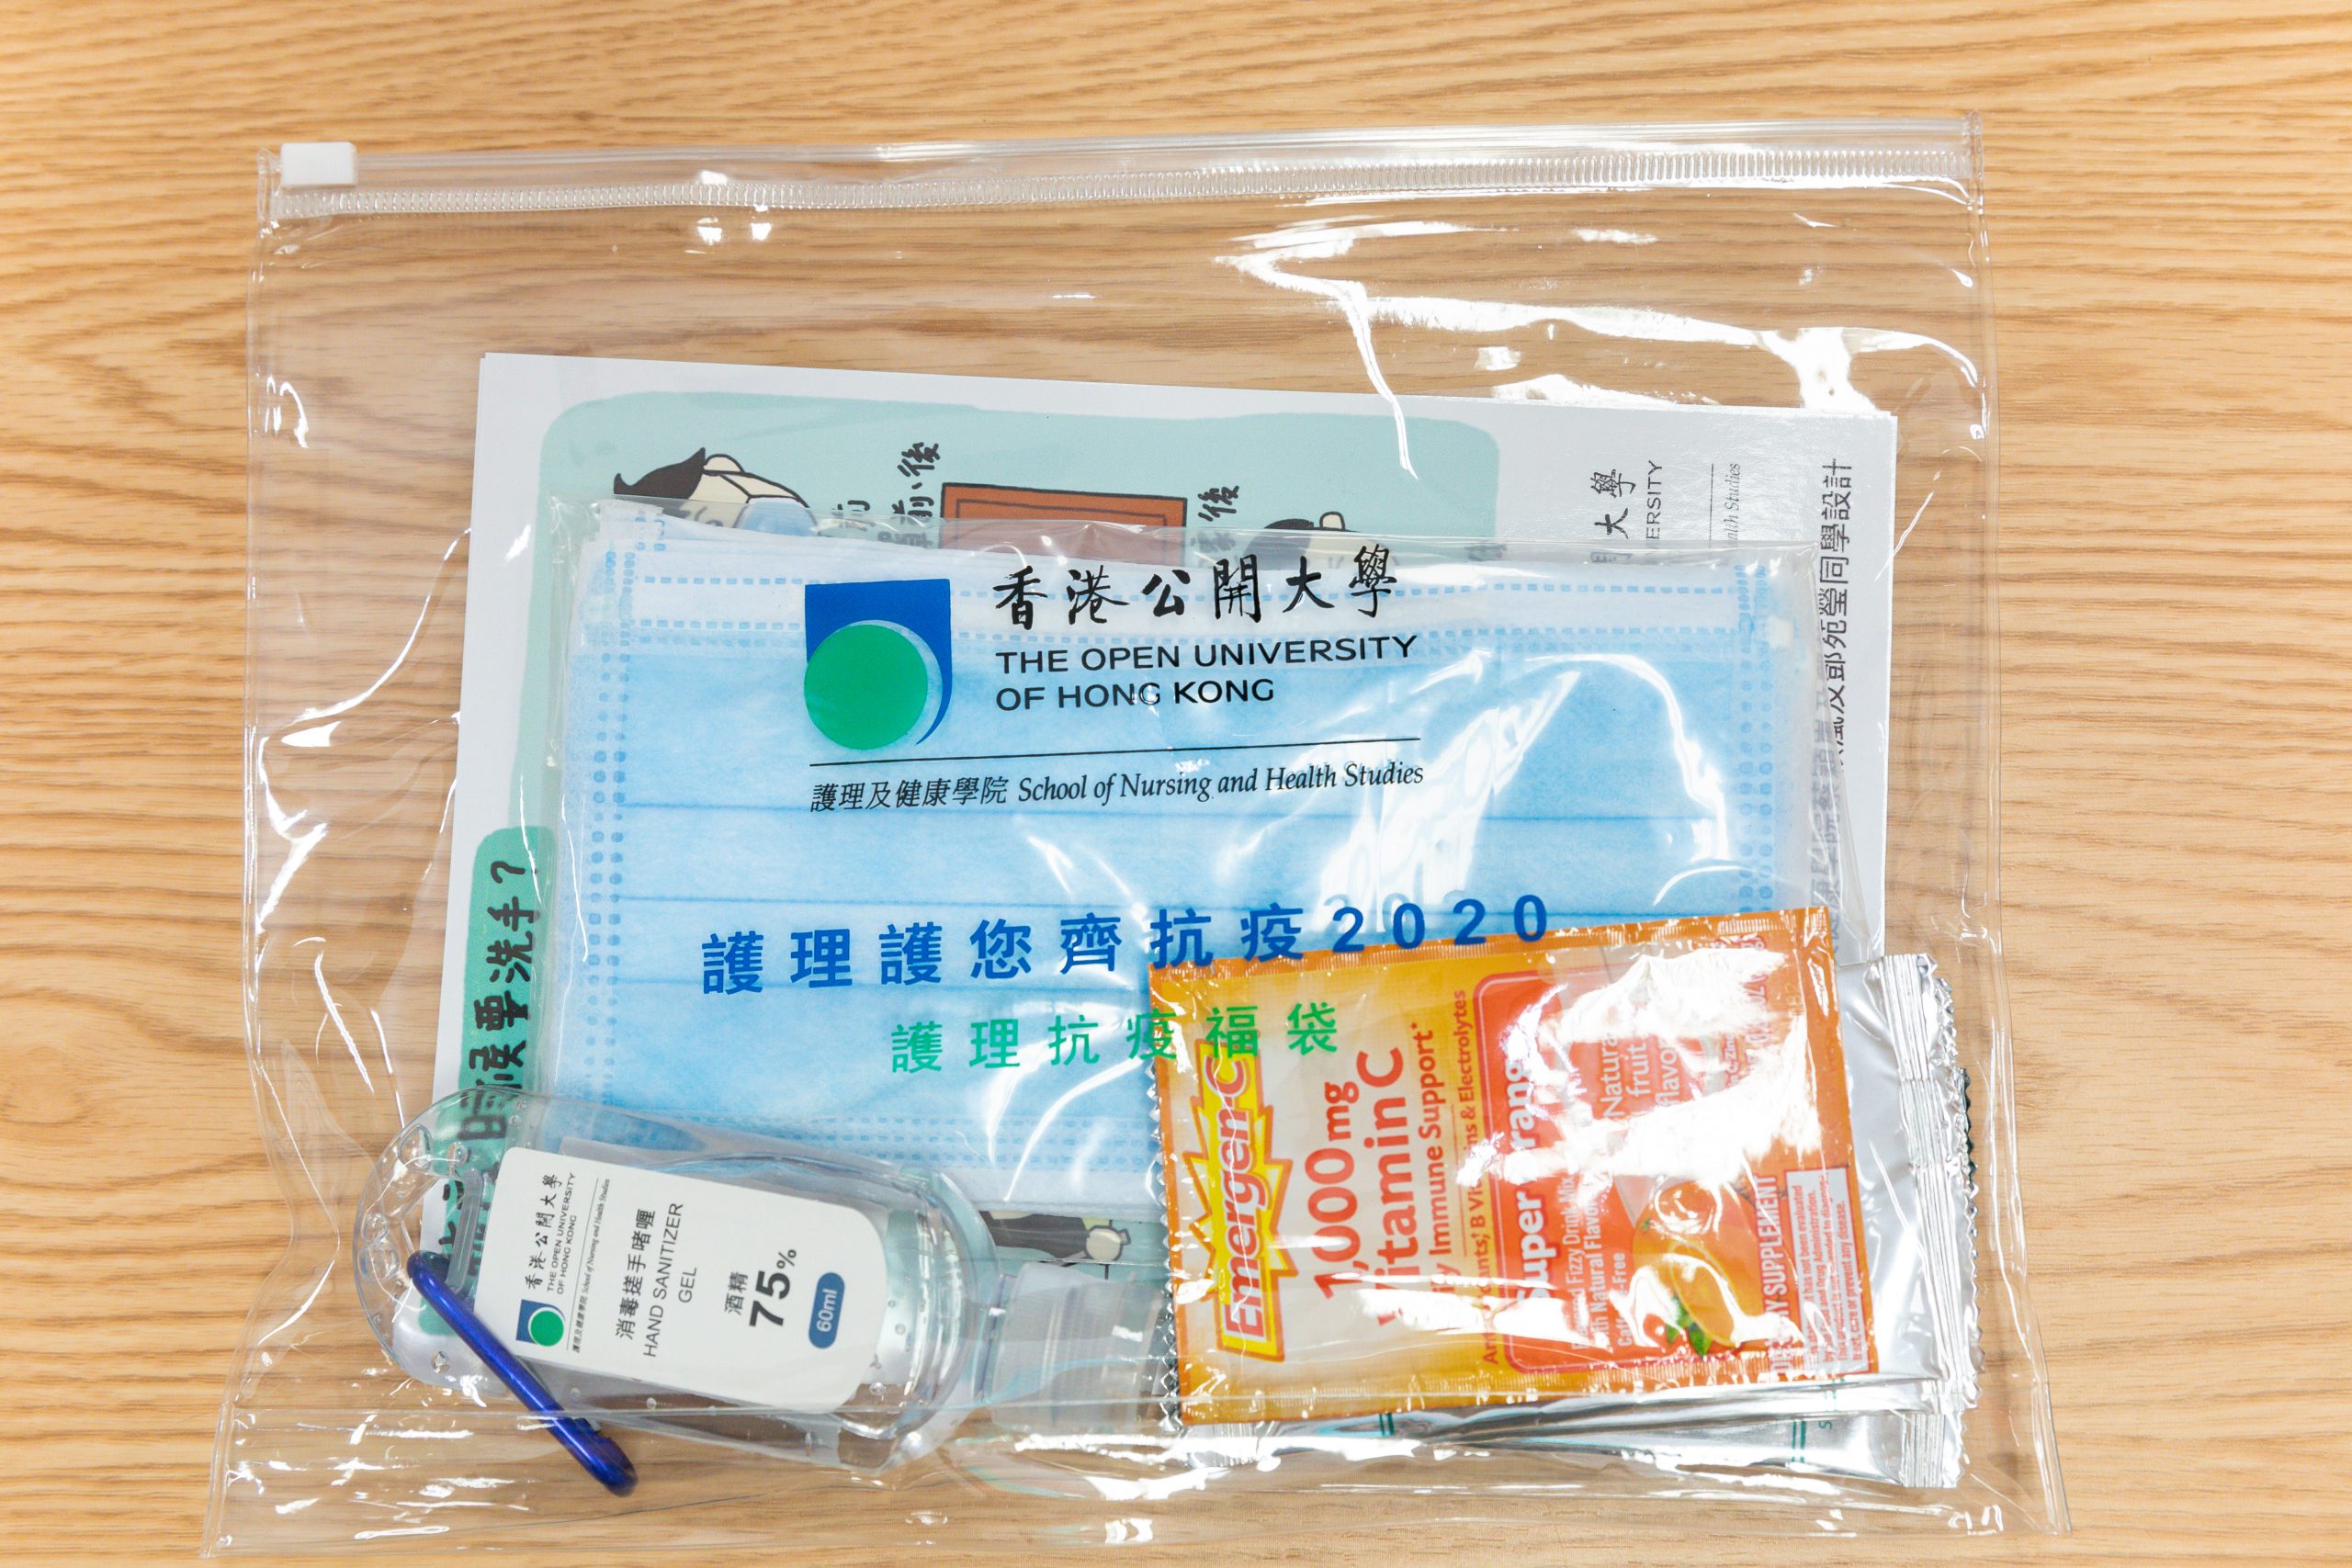 4,000 people in need will be benefited from the protection packs donated by the OUHK.